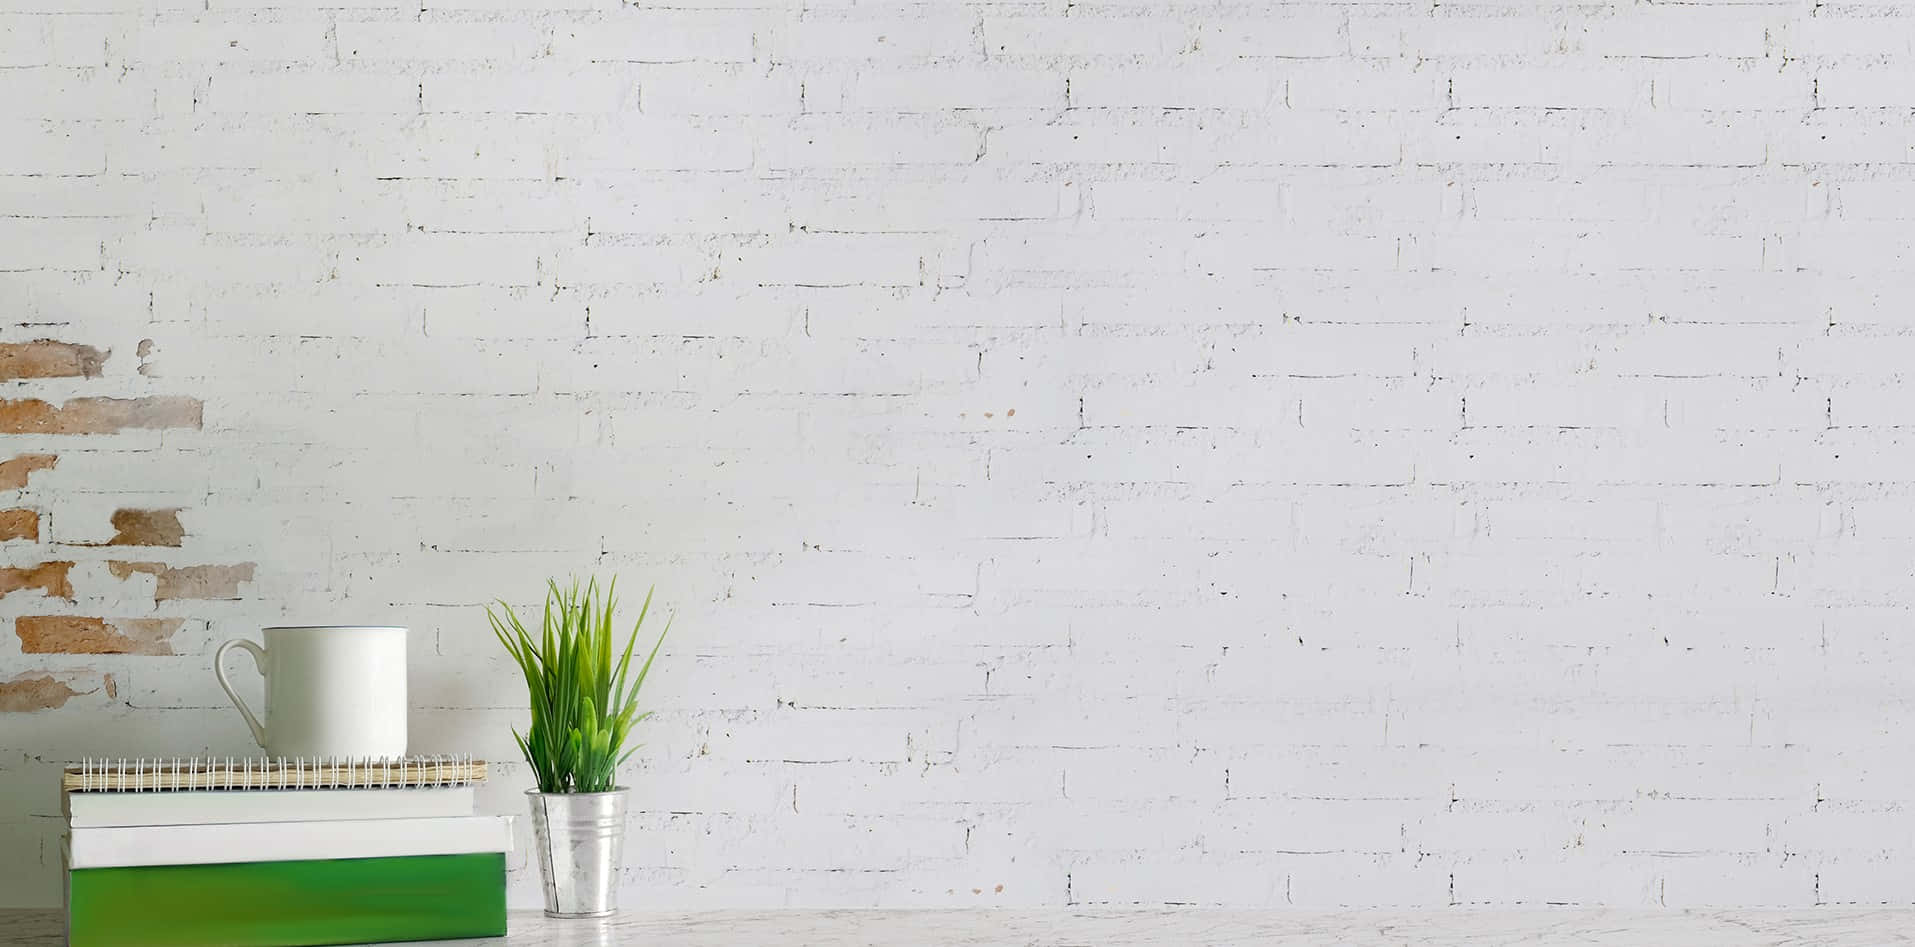 A White Brick Wall With A Plant And Books